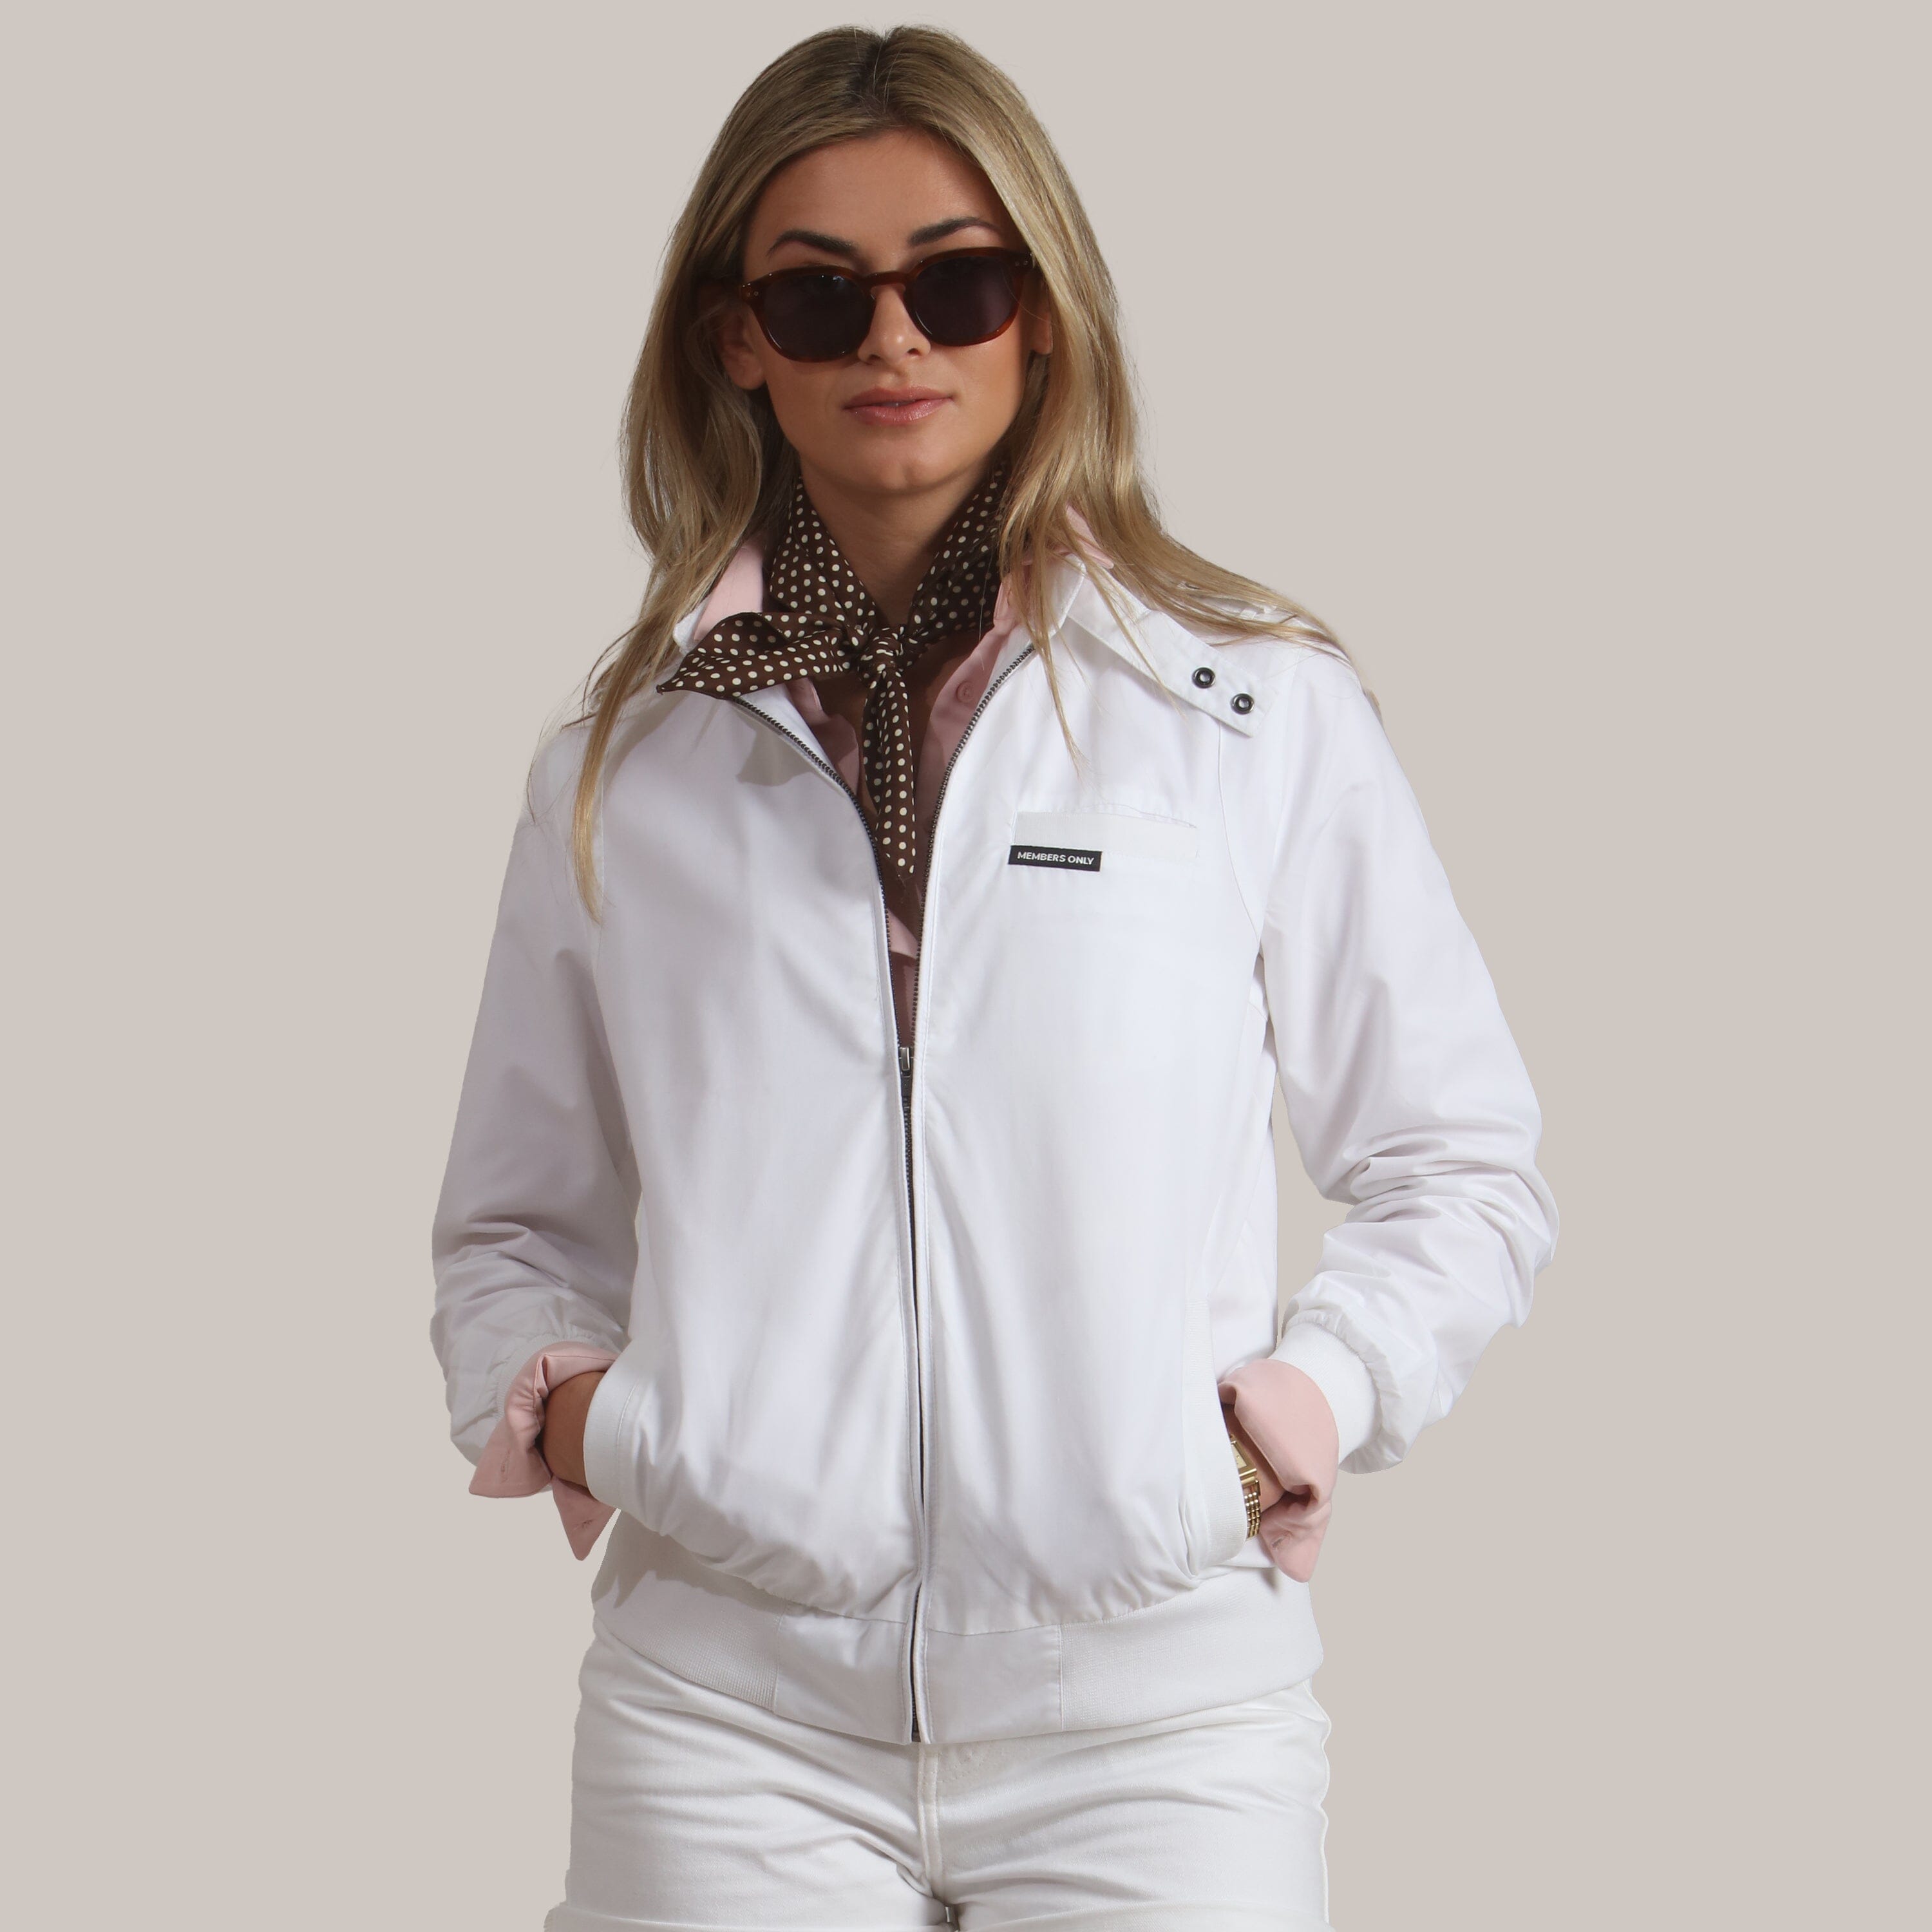 Women's Classic Iconic Racer Jacket (Slim Fit) Women's Iconic Jacket Members Only 